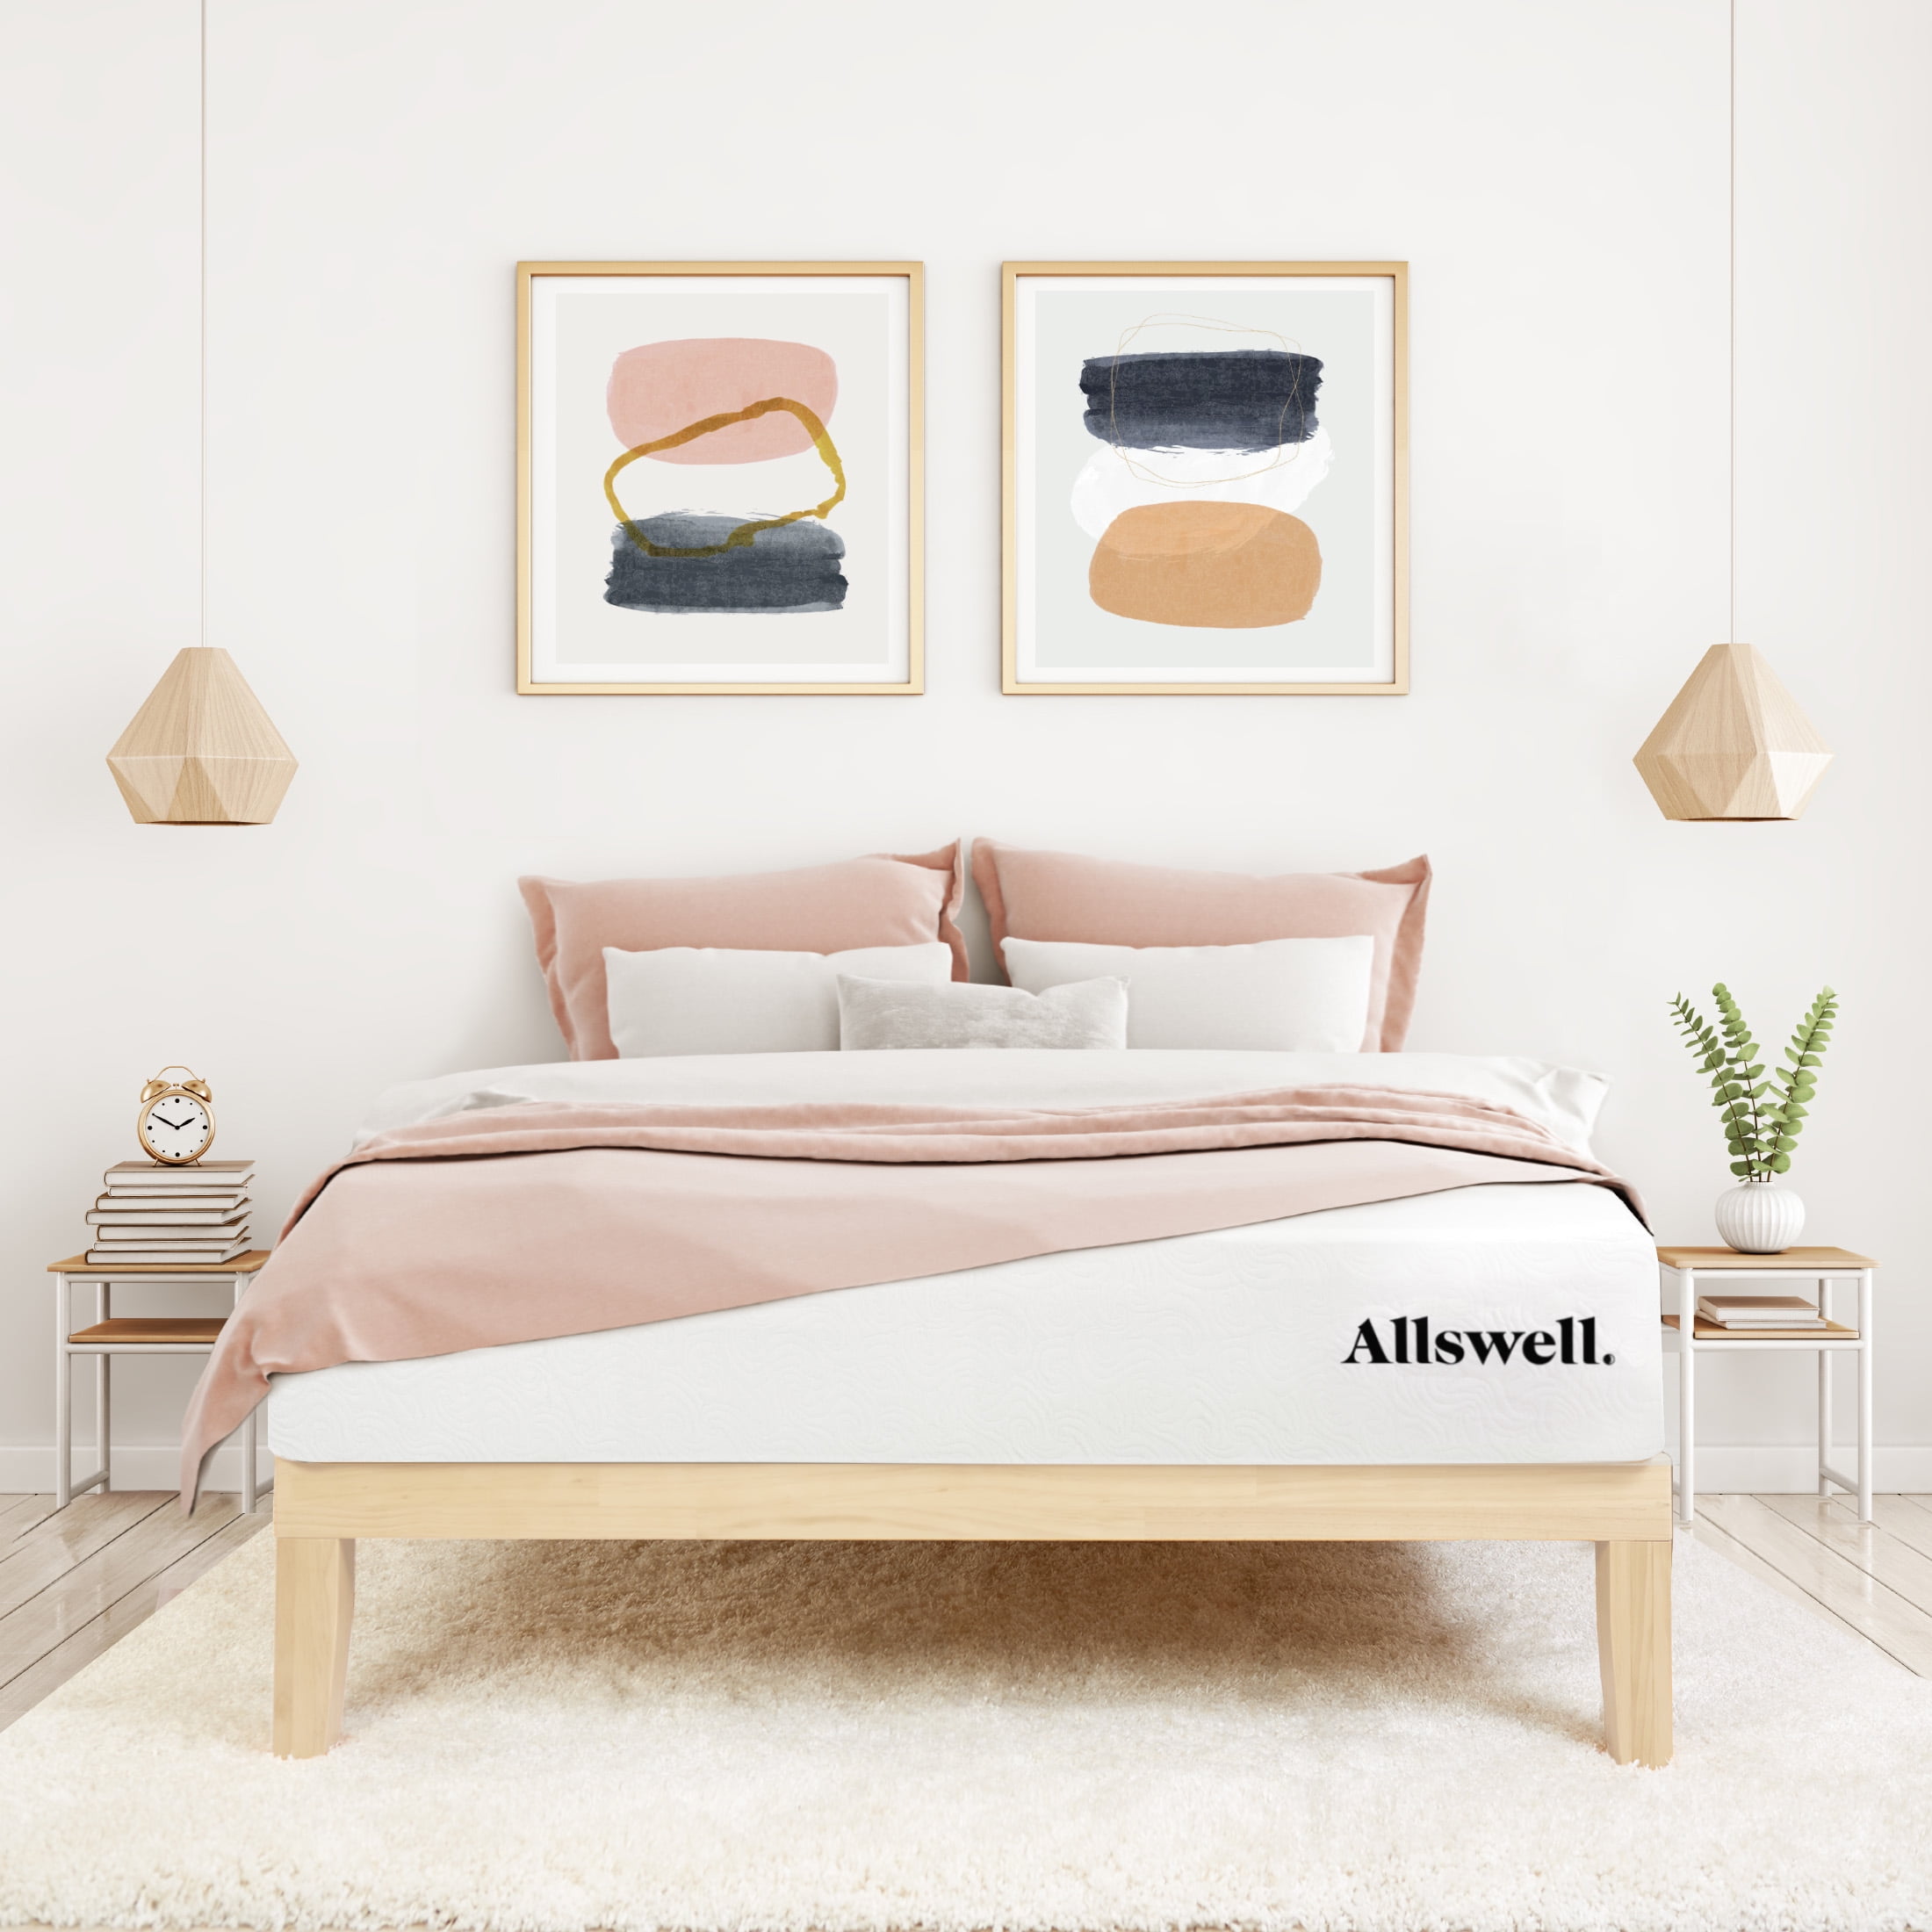 The Allswell X 10” Hybrid of Memory Foam and Coils Mattress With Antimicrobial Treated Cover, Queen